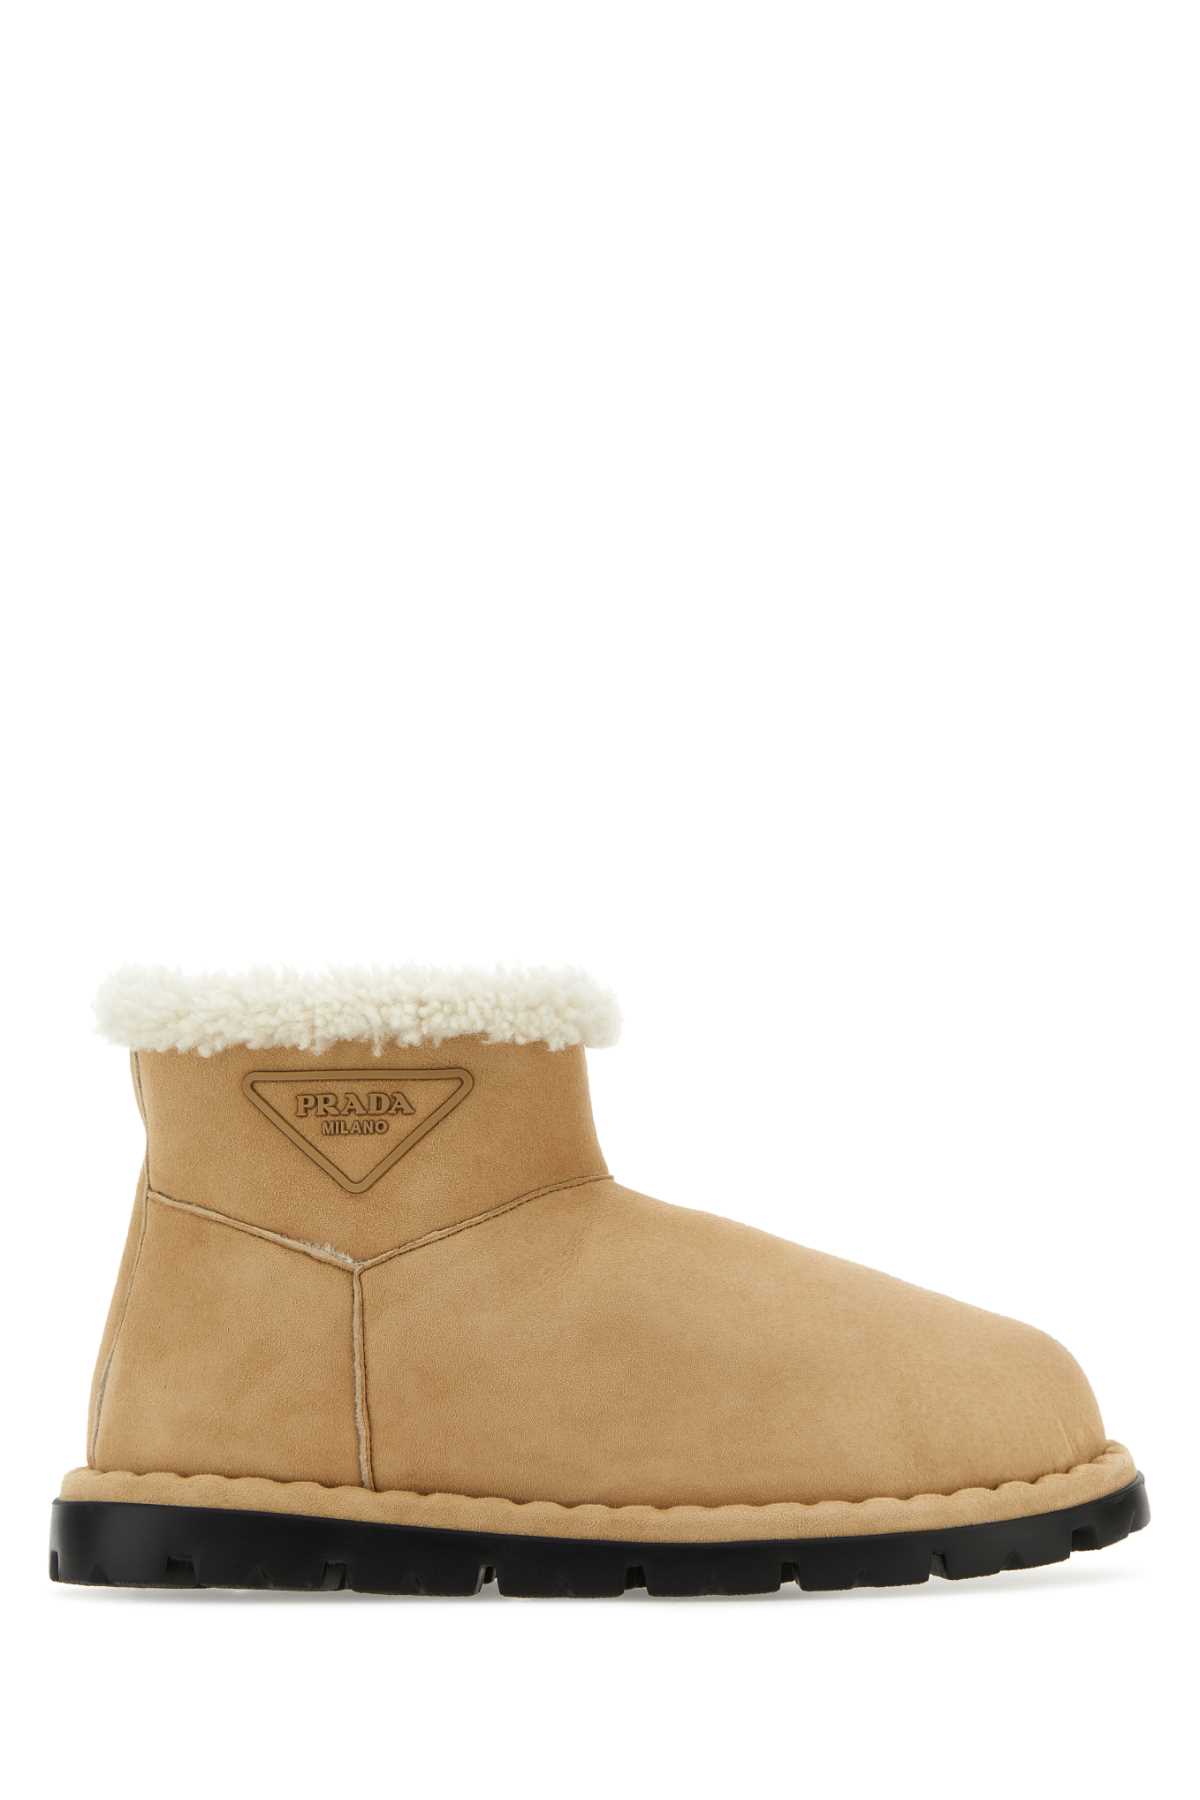 Prada Beige Suede Ankle Boots